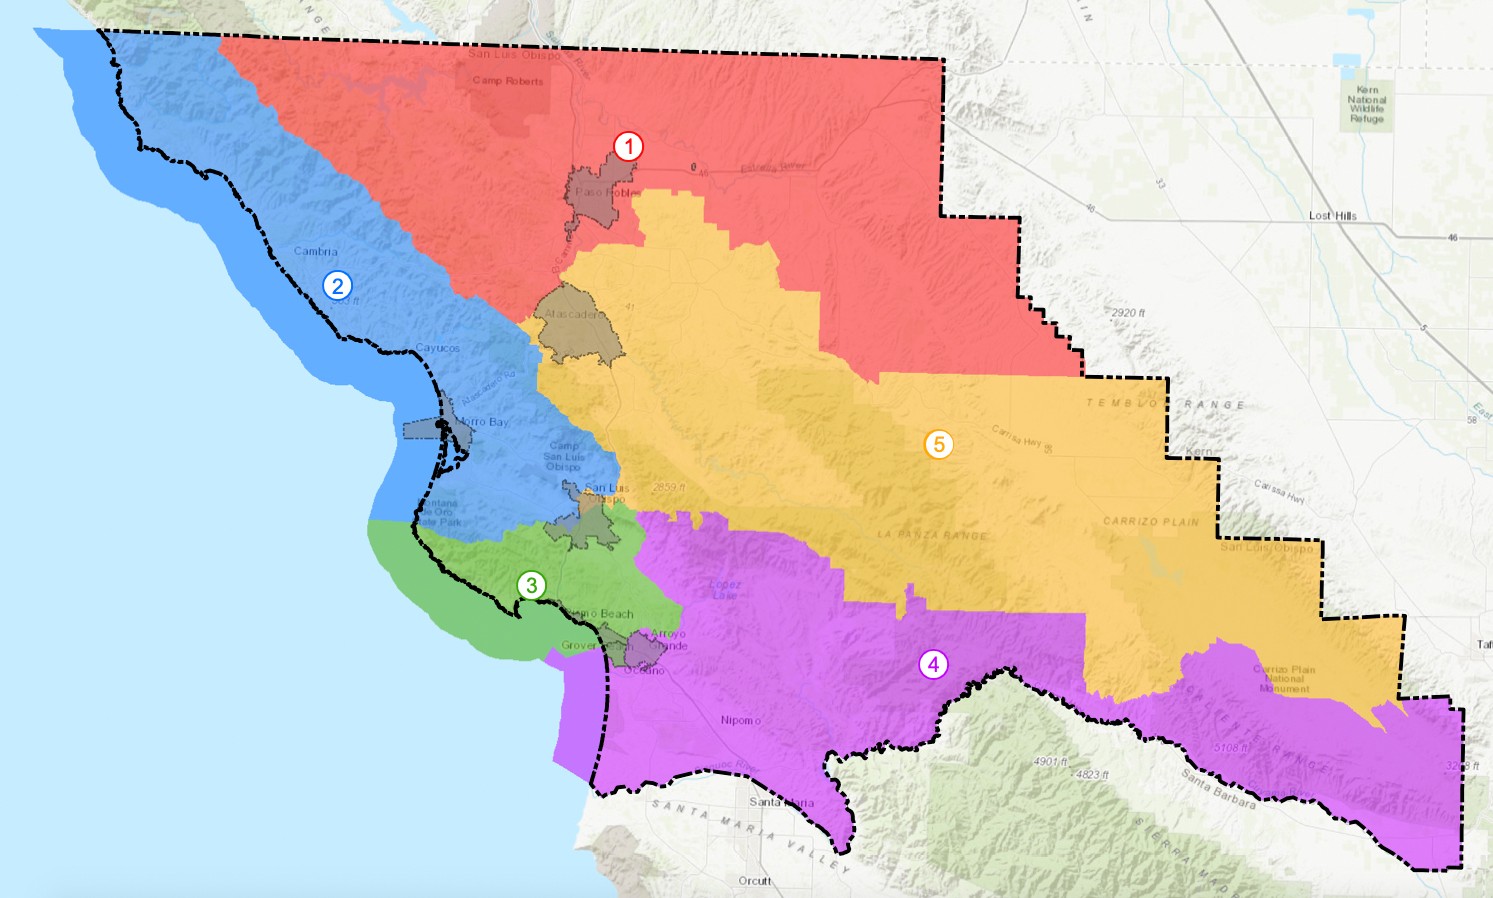 SLO County adopts redistricting map similar to 2011 map, repeals Patten